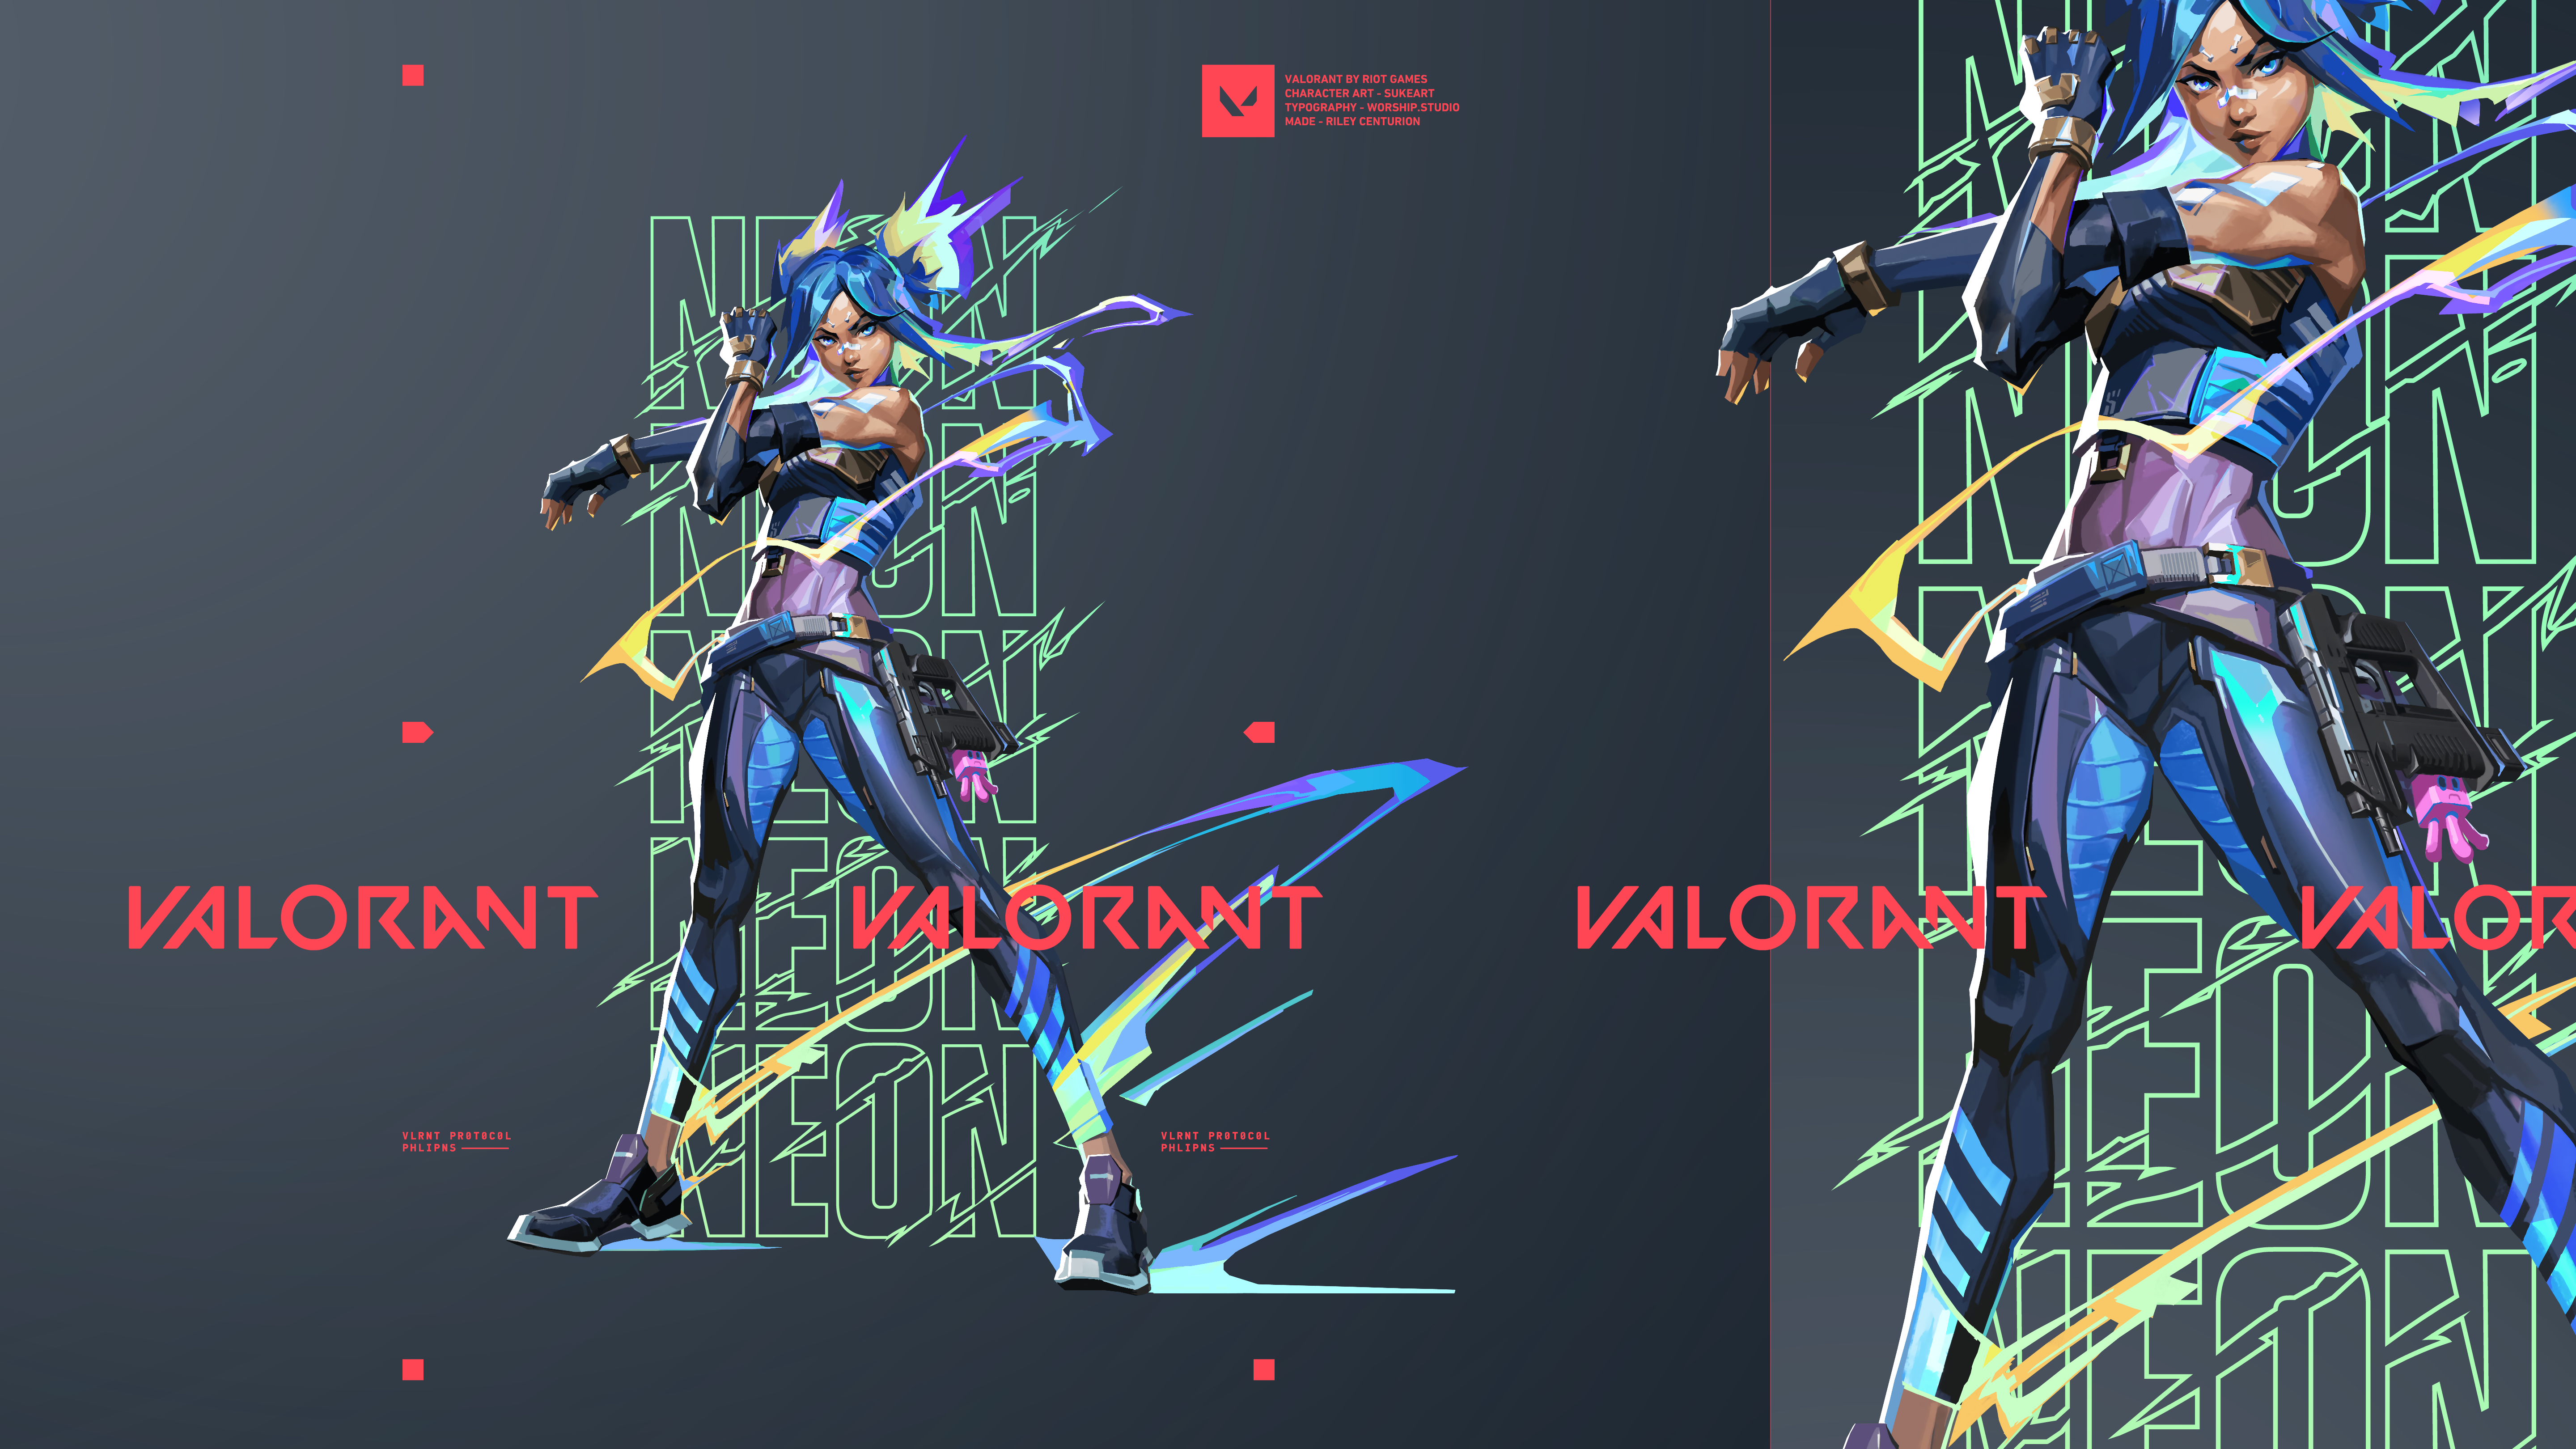 Cool Valorant Neon 2020 Wallpapers